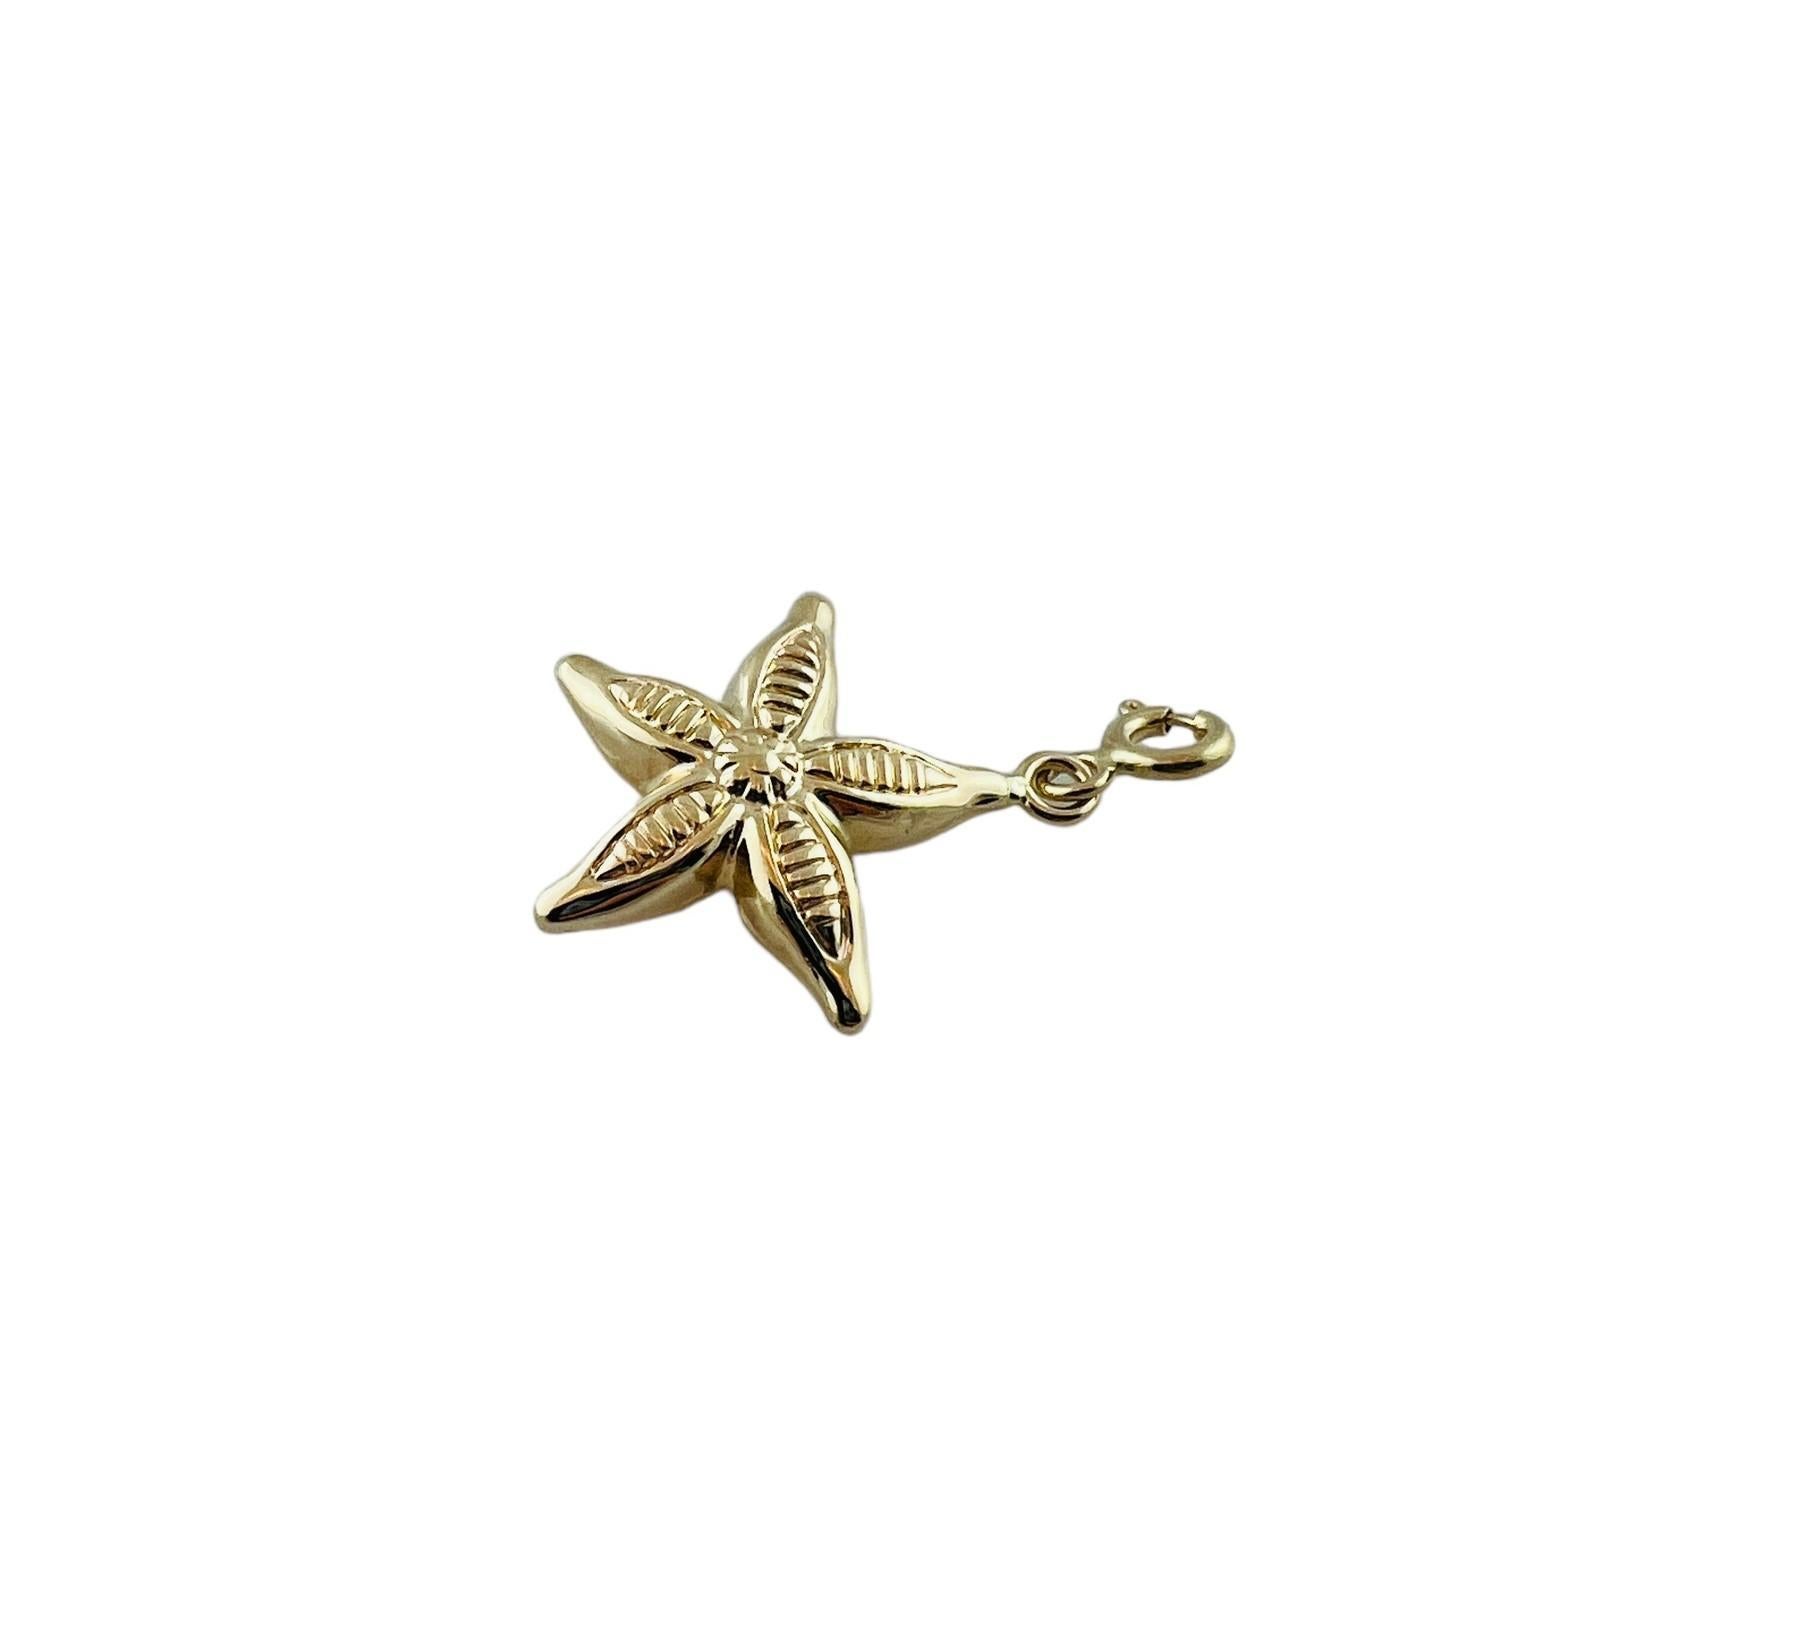 14K Yellow Gold Starfish Charm

This sweet charm  is set in 14K Yellow gold and on a spring ring for ease of putting on charm bracelet

Charm measures approx. 22.1 mm x 19.5 mm x 5.1 mm

1.3 grams / 0.8 dwt

Stamped 585

*Does not come with